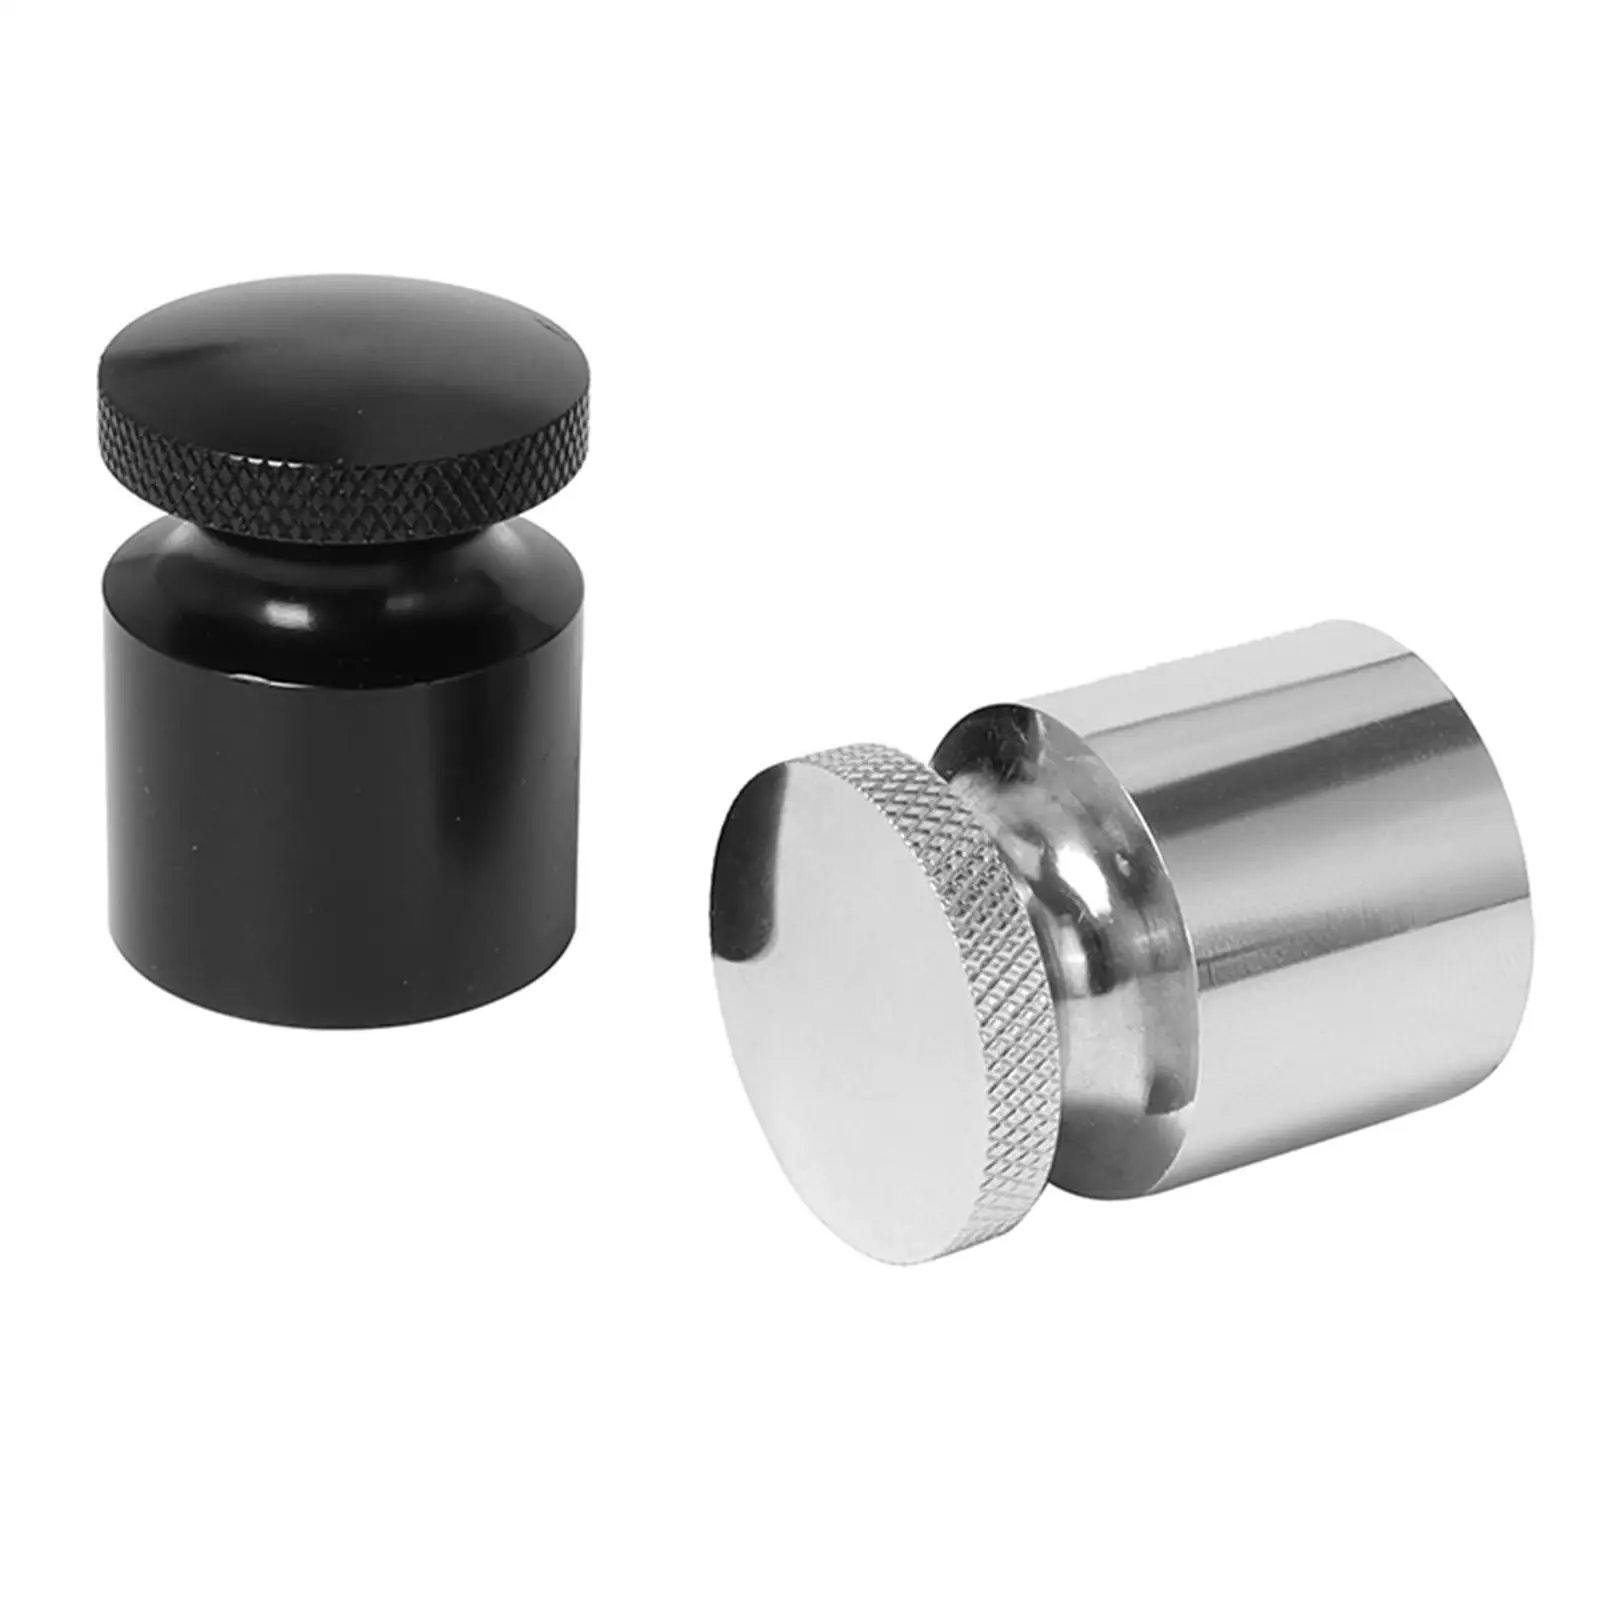 Accessory Choke Knob Cover for    with Threaded Brass Insert Parts Professional Easy to Install 1x